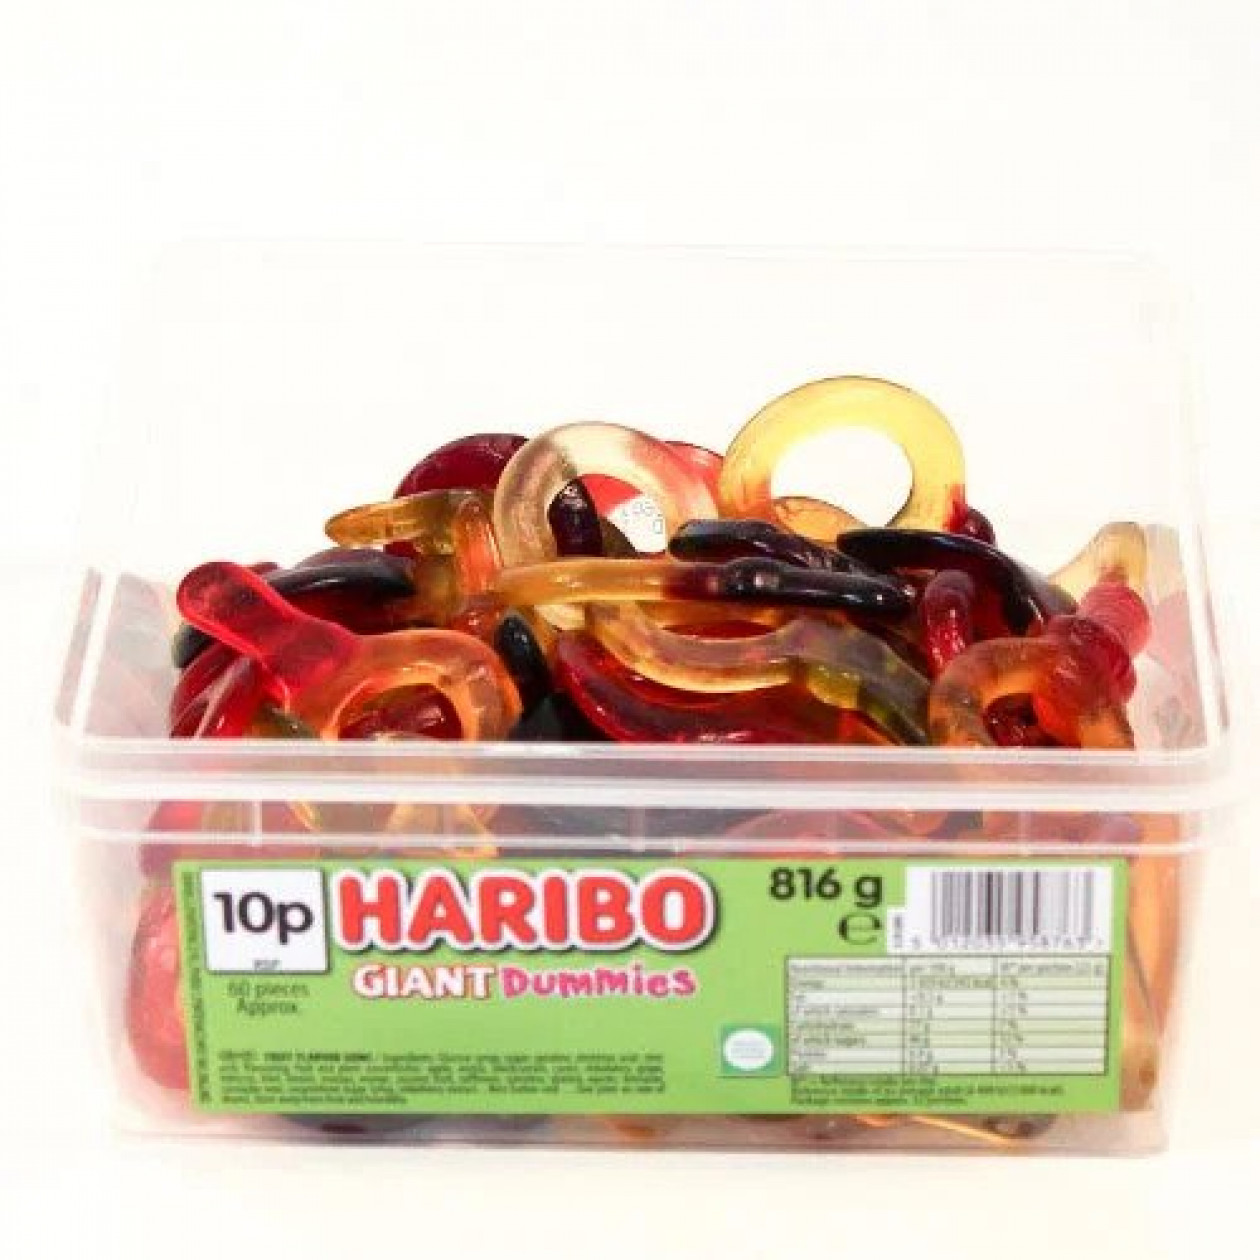 Haribo Giant Dummies Fruit Flavour Jelly Sweets 816g - Pack of 60